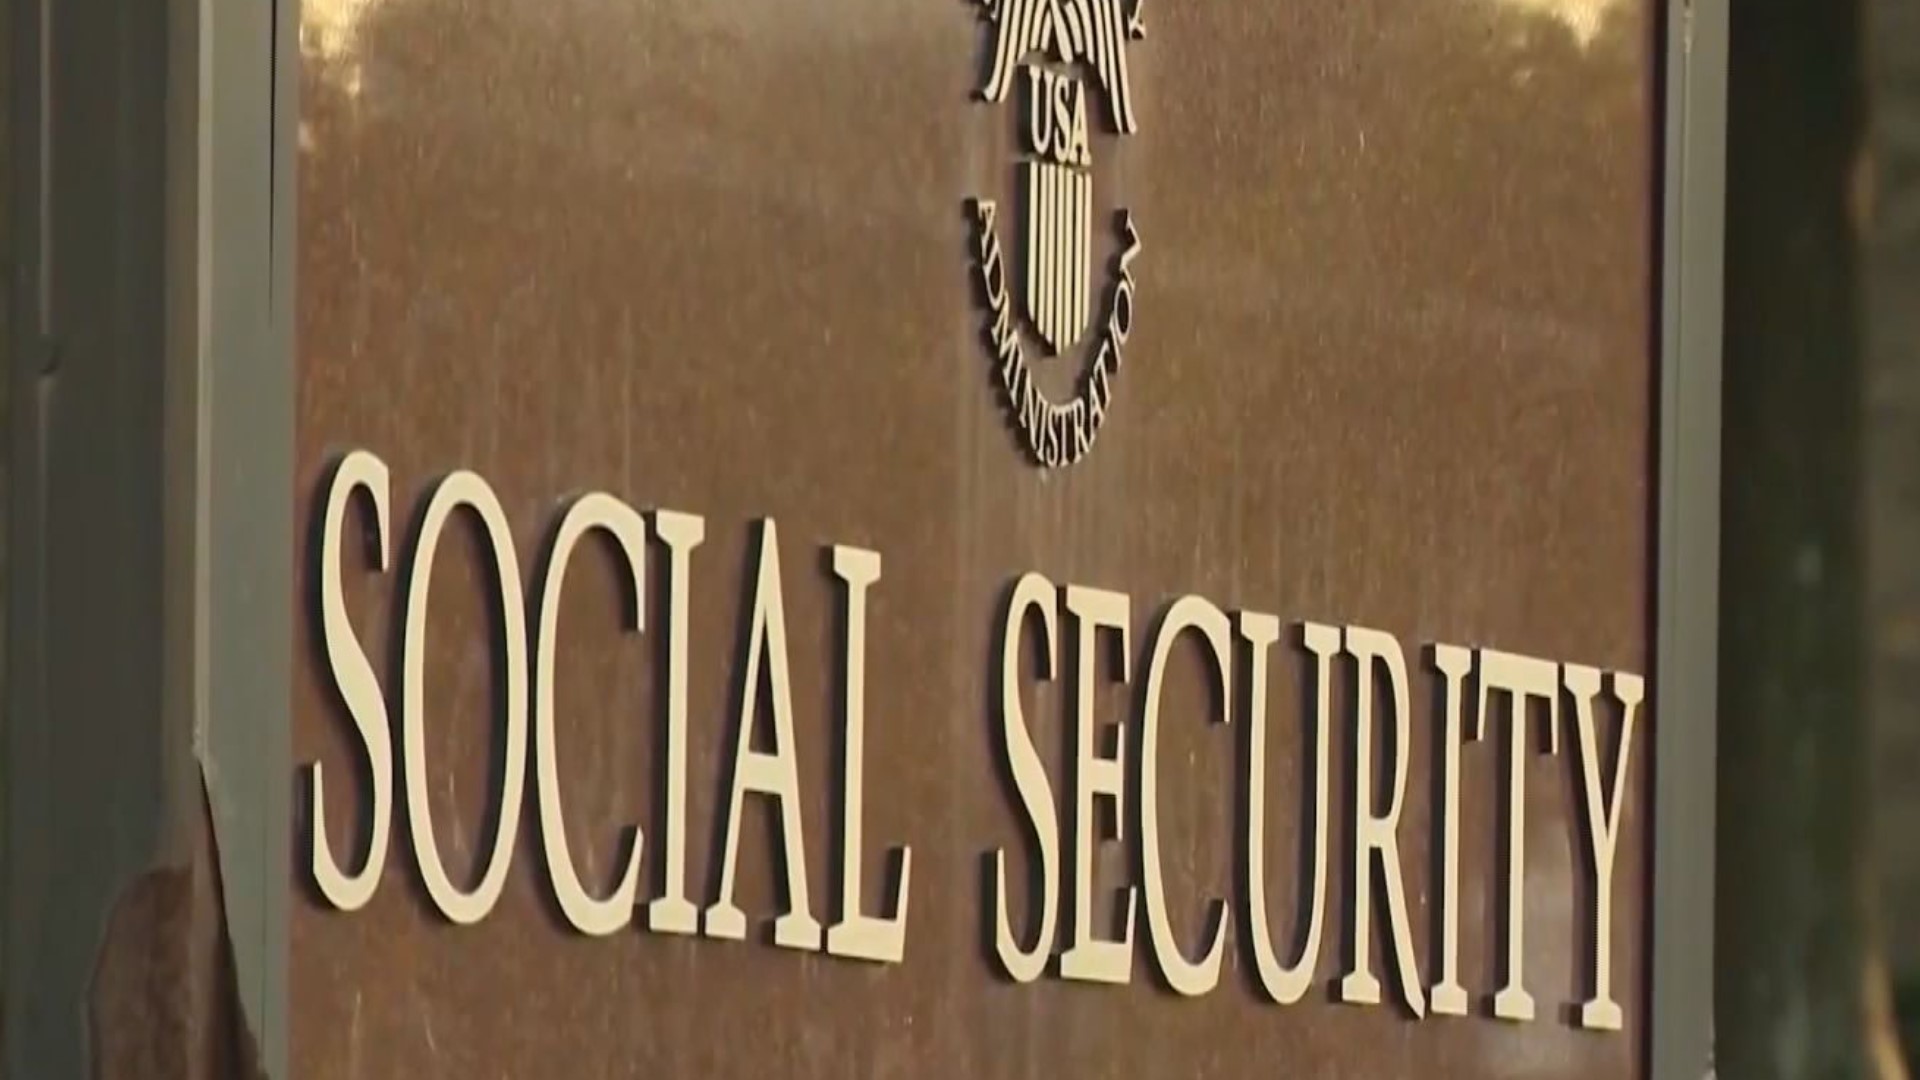 The Social Security Administration announced that benefits will see their biggest increase in nearly 40 years.